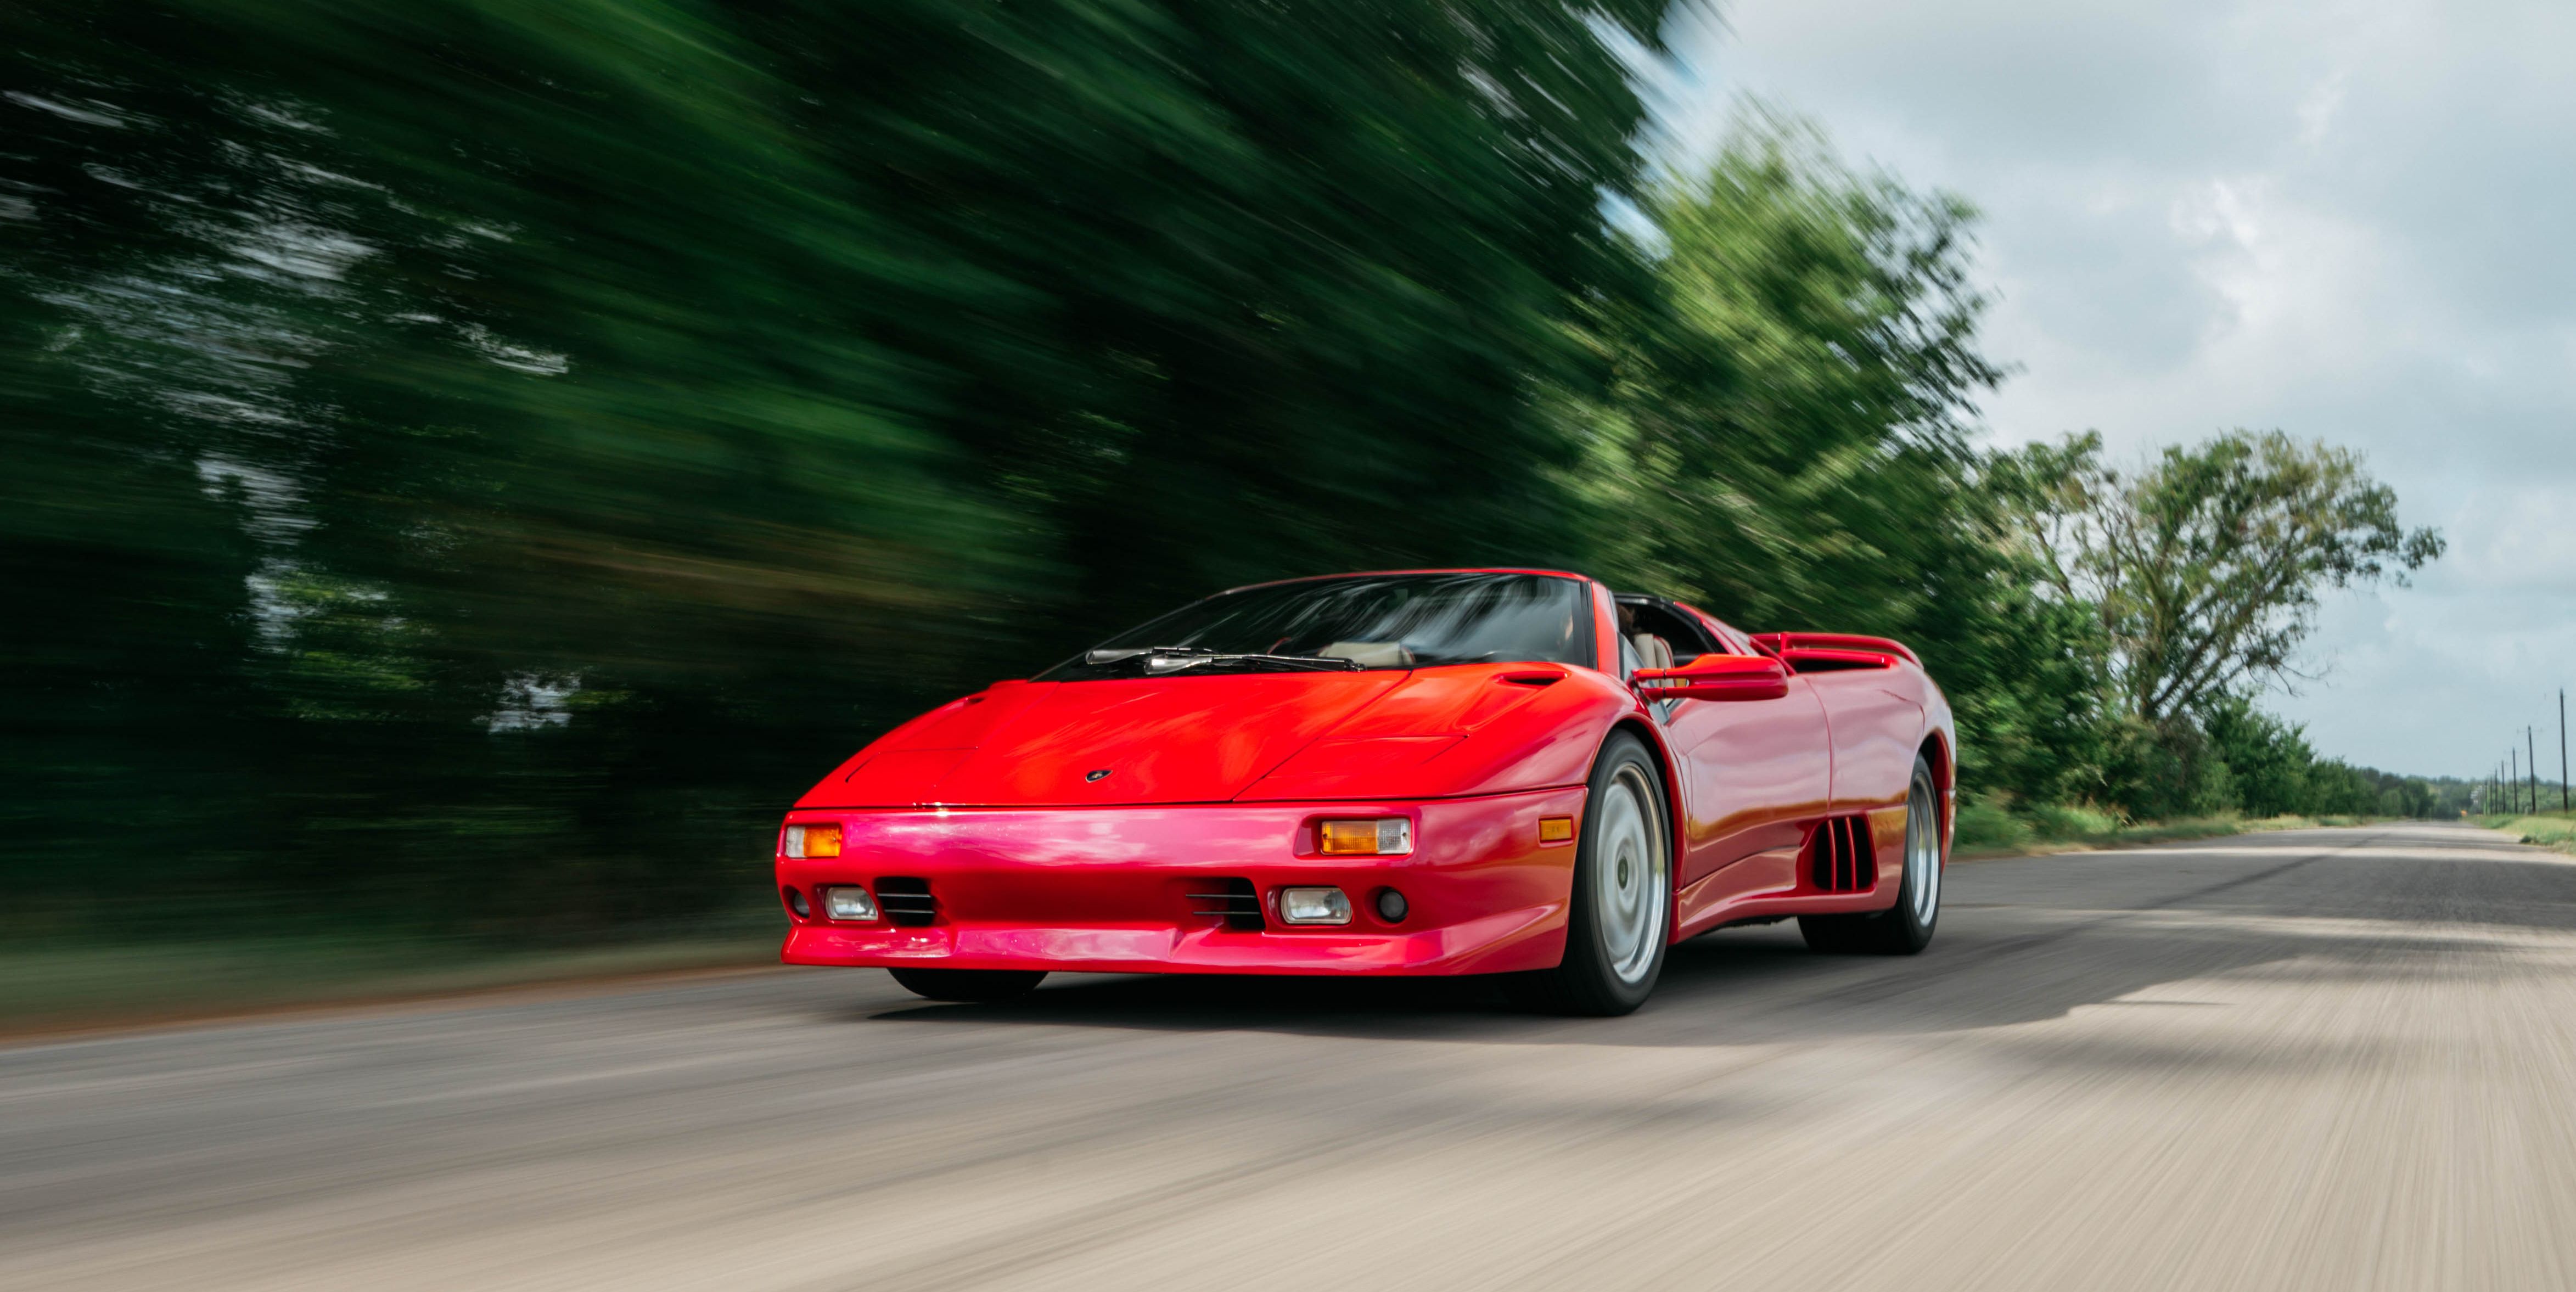 Driving a Pink Lamborghini Diablo VT Showed Me Why Supercars Aren't Silly Anymore